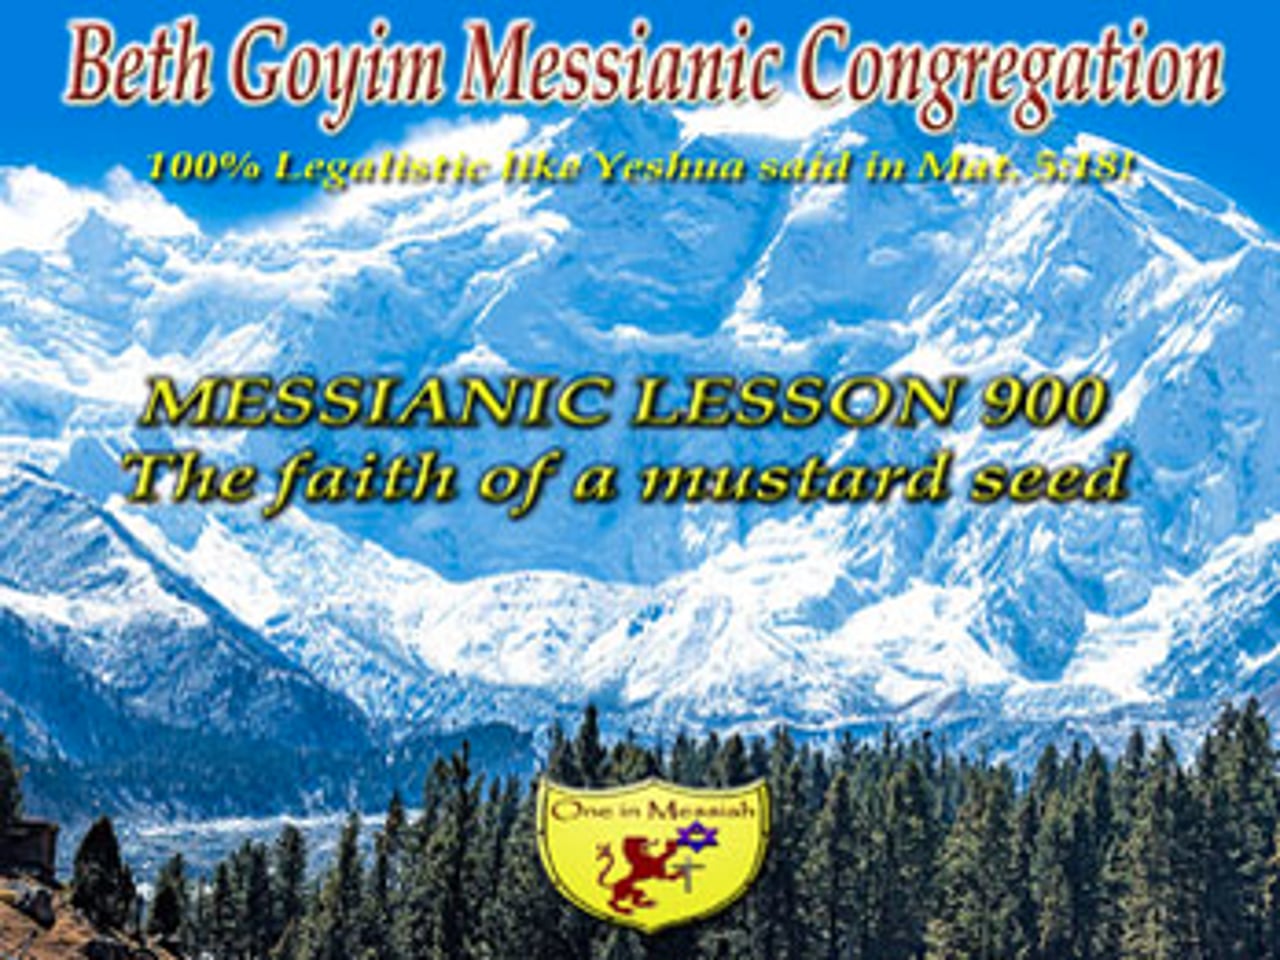 BGMCTV MESSIANIC LESSON 900 THE FAITH OF A MUSTARD SEED